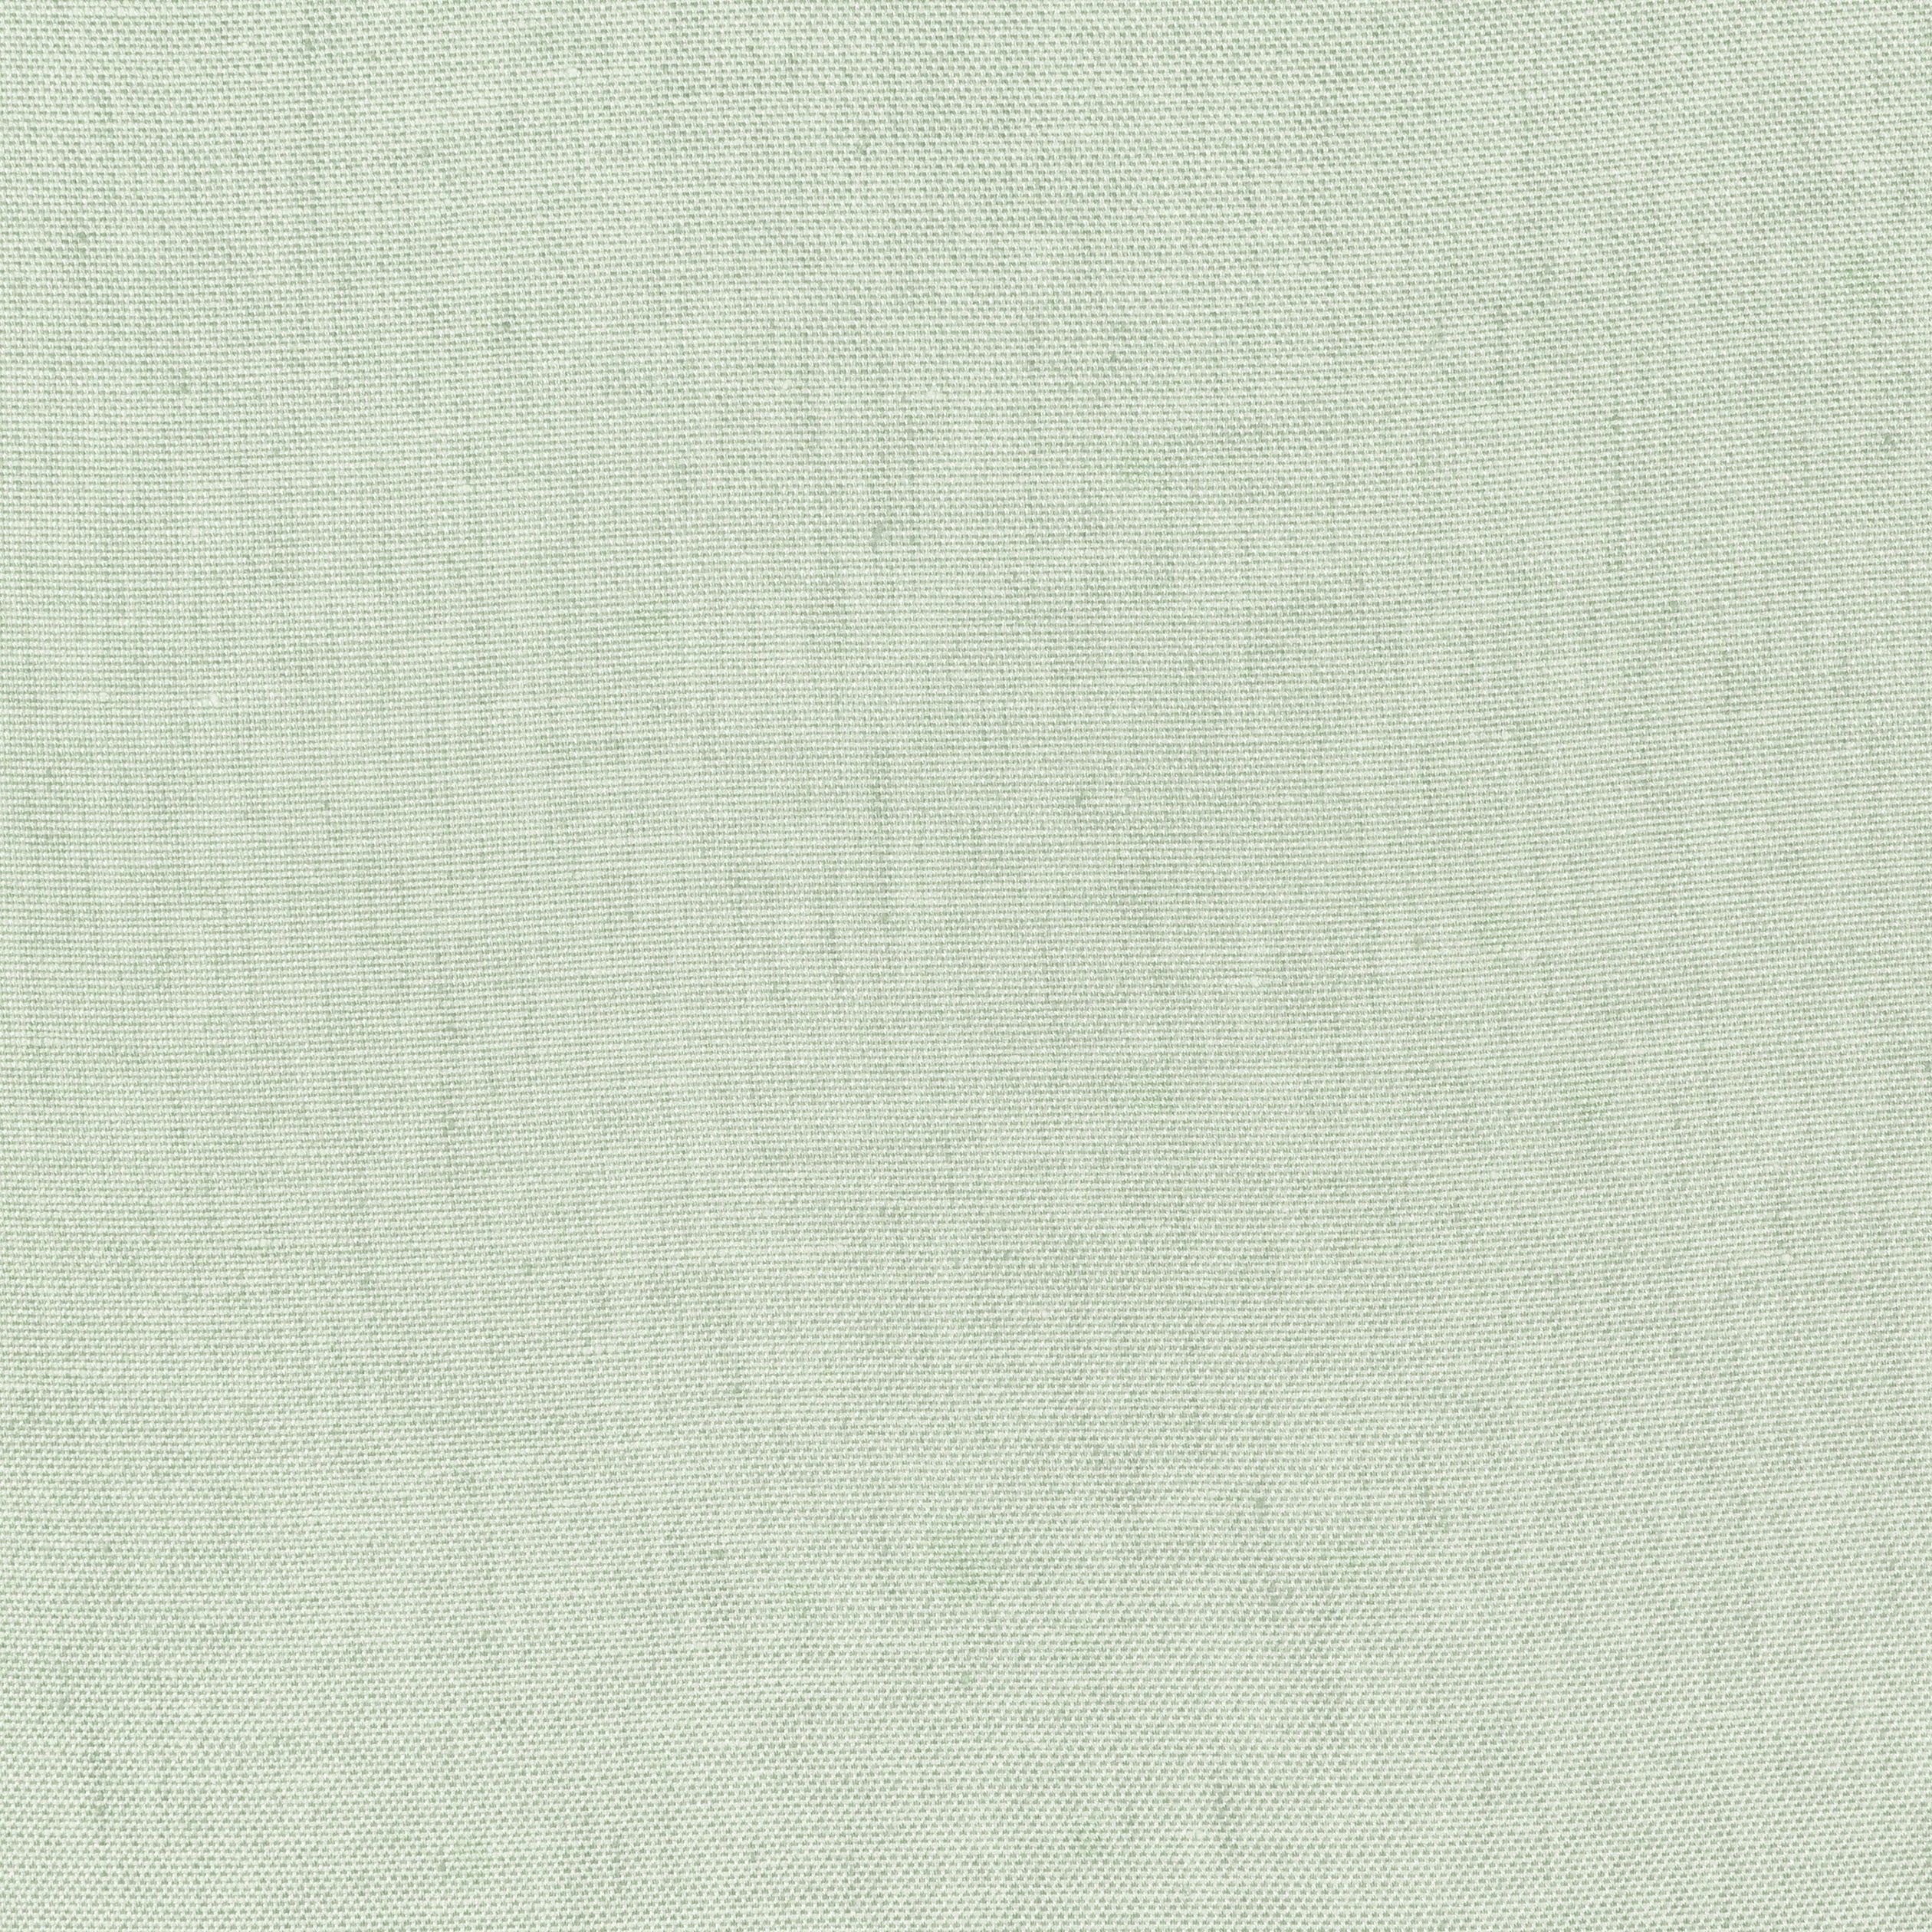 Skye Linen fabric in sage color - pattern number FWW7619 - by Thibaut in the Palisades collection